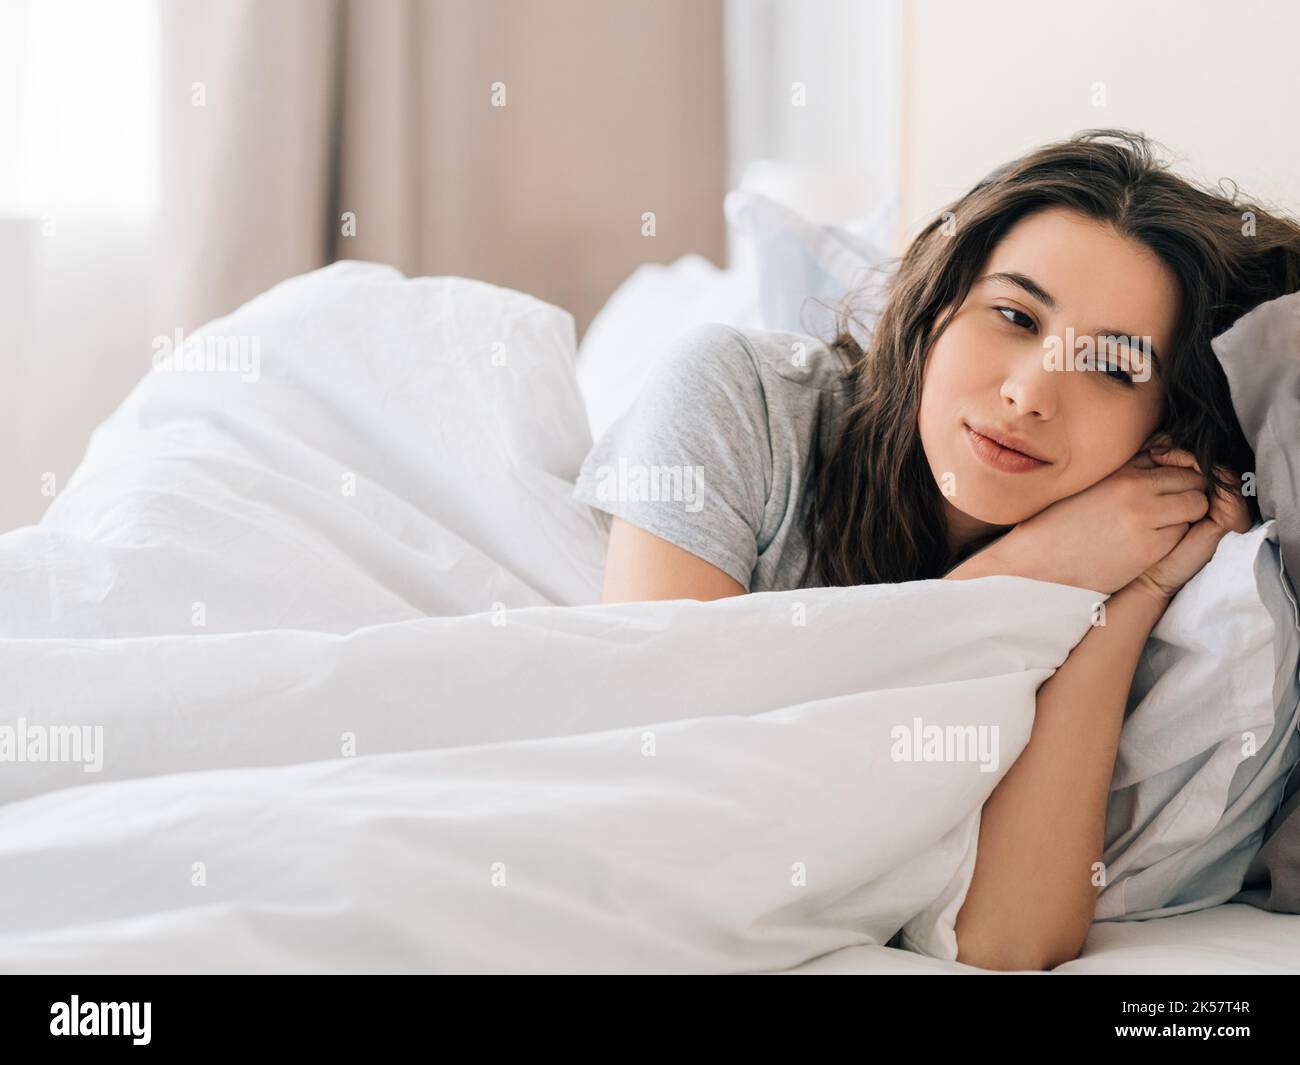 Cozy morning. Sunday relaxation. Home rest. Peaceful thoughtful daydreaming brunette woman enjoying lying in bed alone with white blanket in light bed Stock Photo